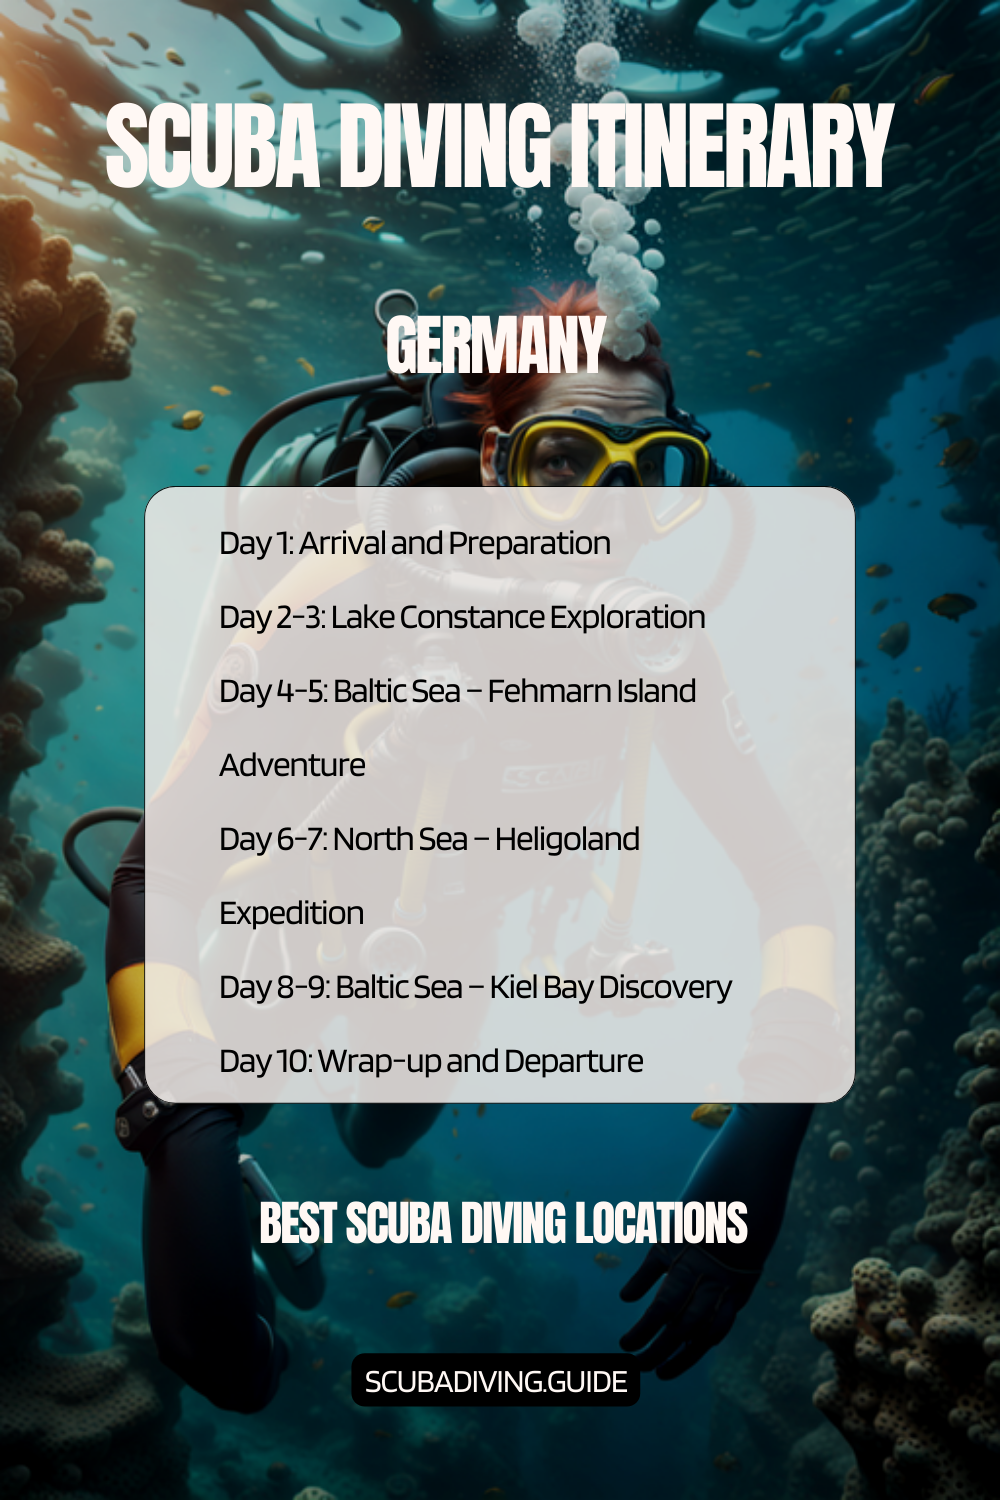 Germany Recommended Scuba Diving Itinerary